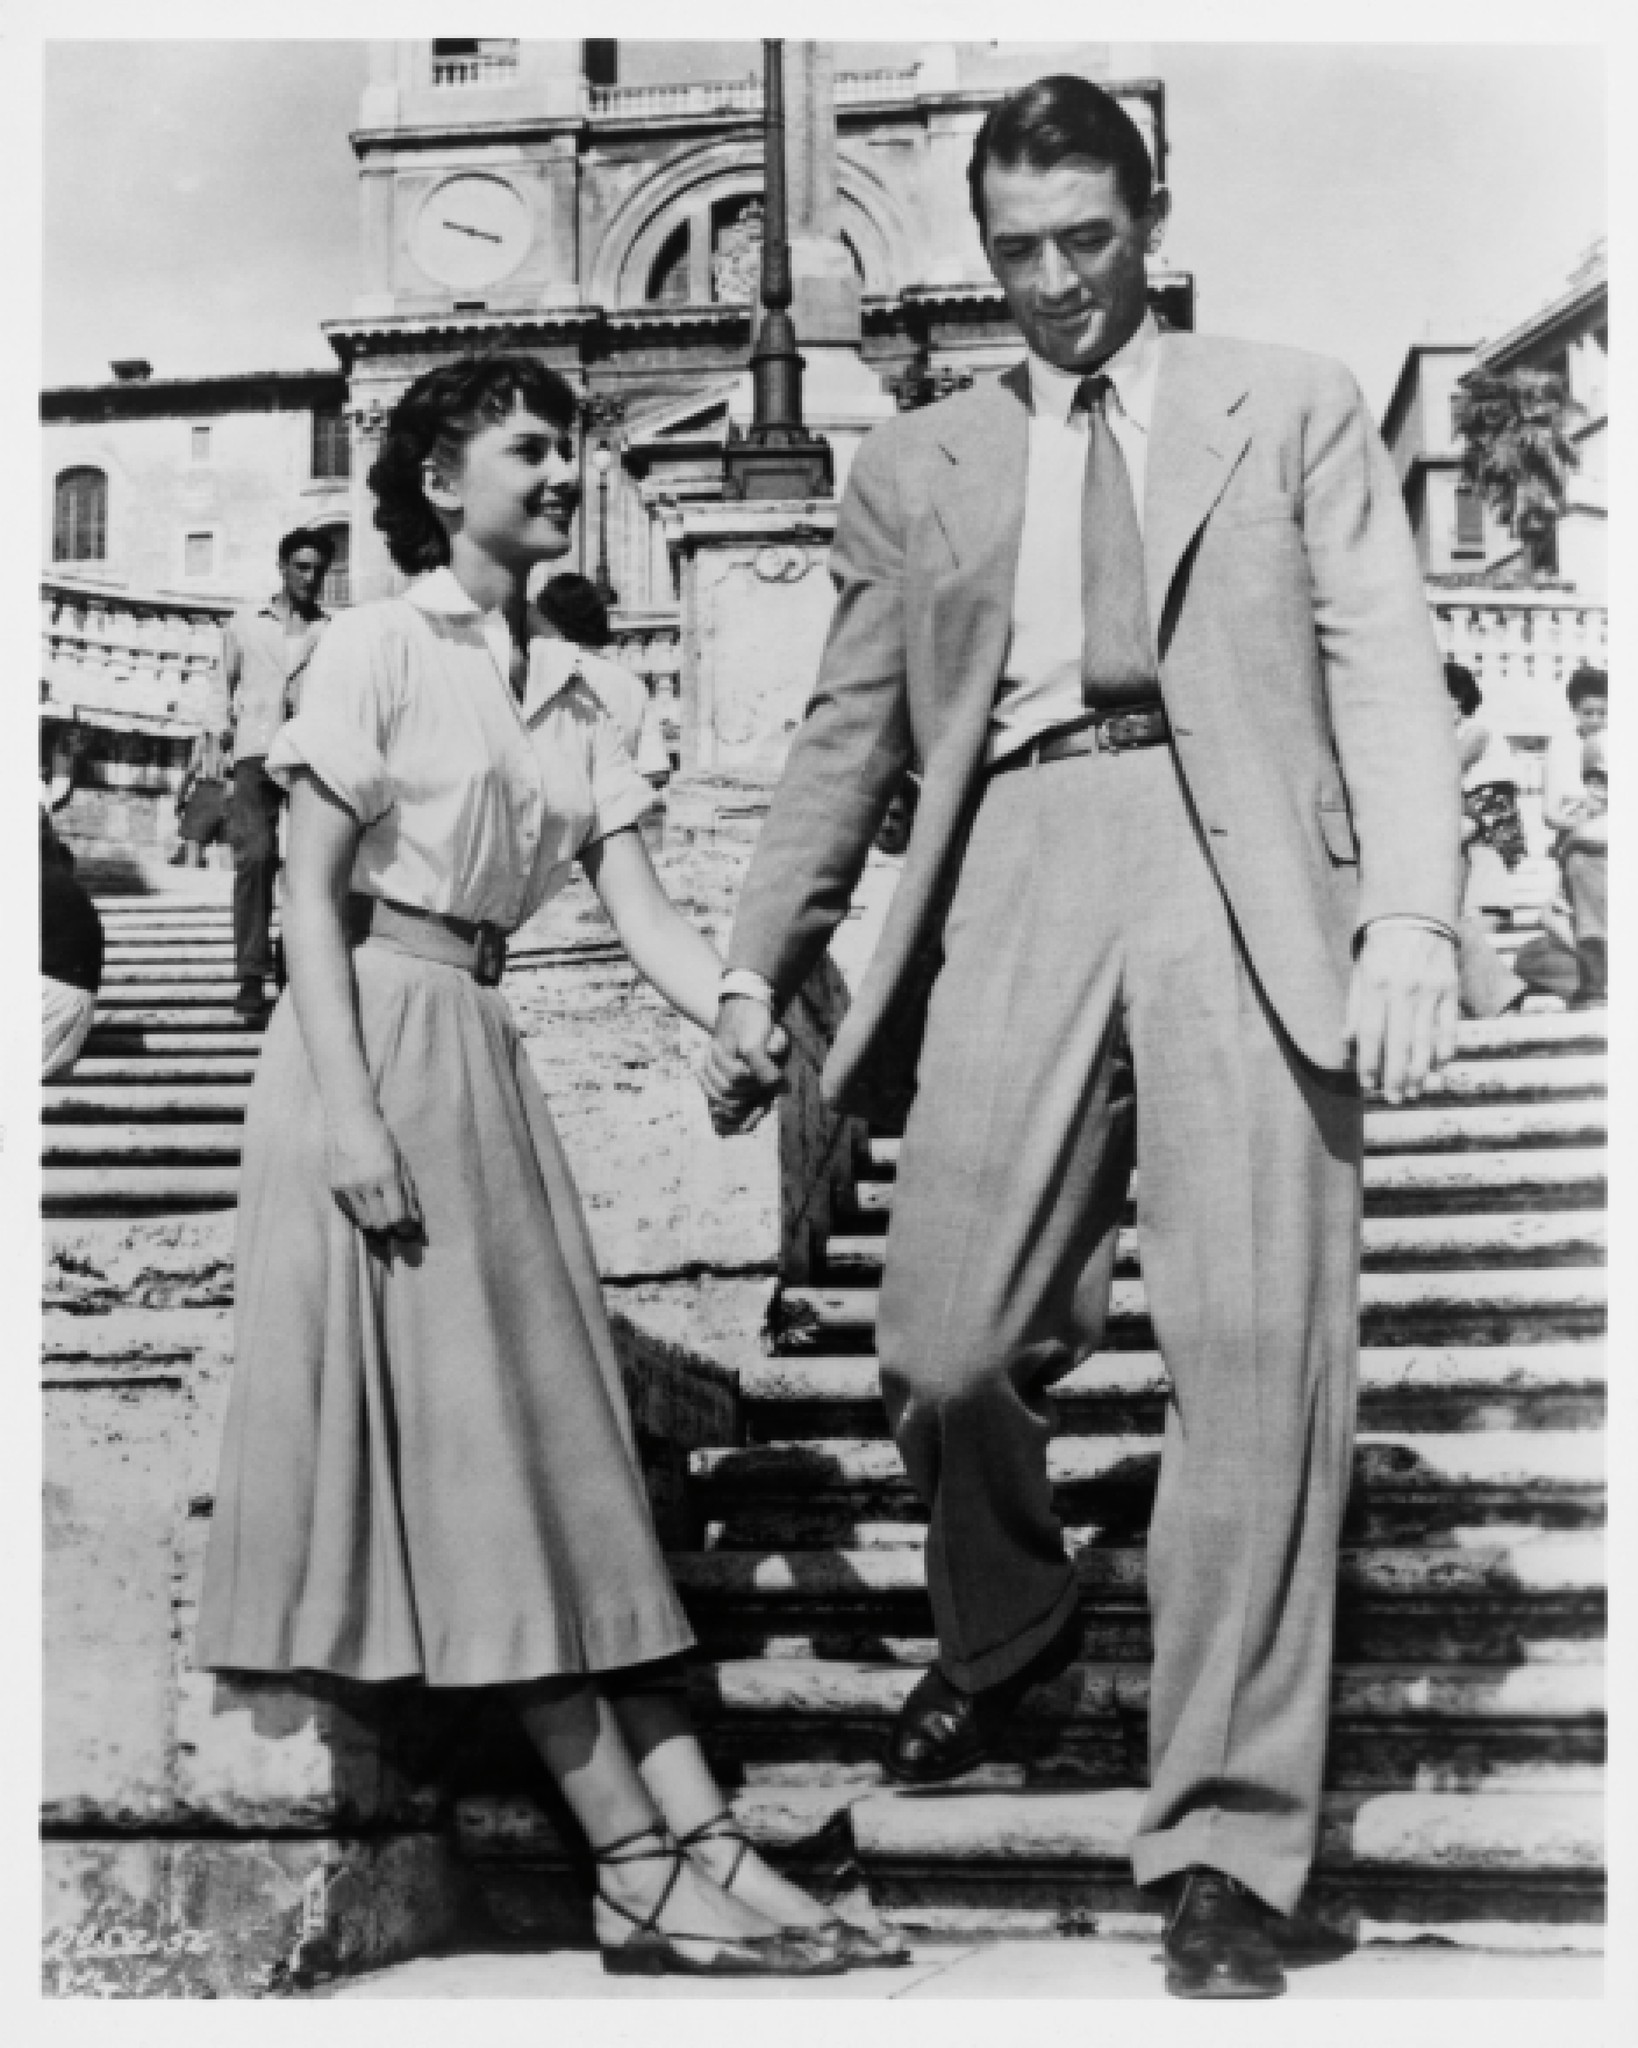 Still of Audrey Hepburn and Gregory Peck in Roman Holiday (1953)